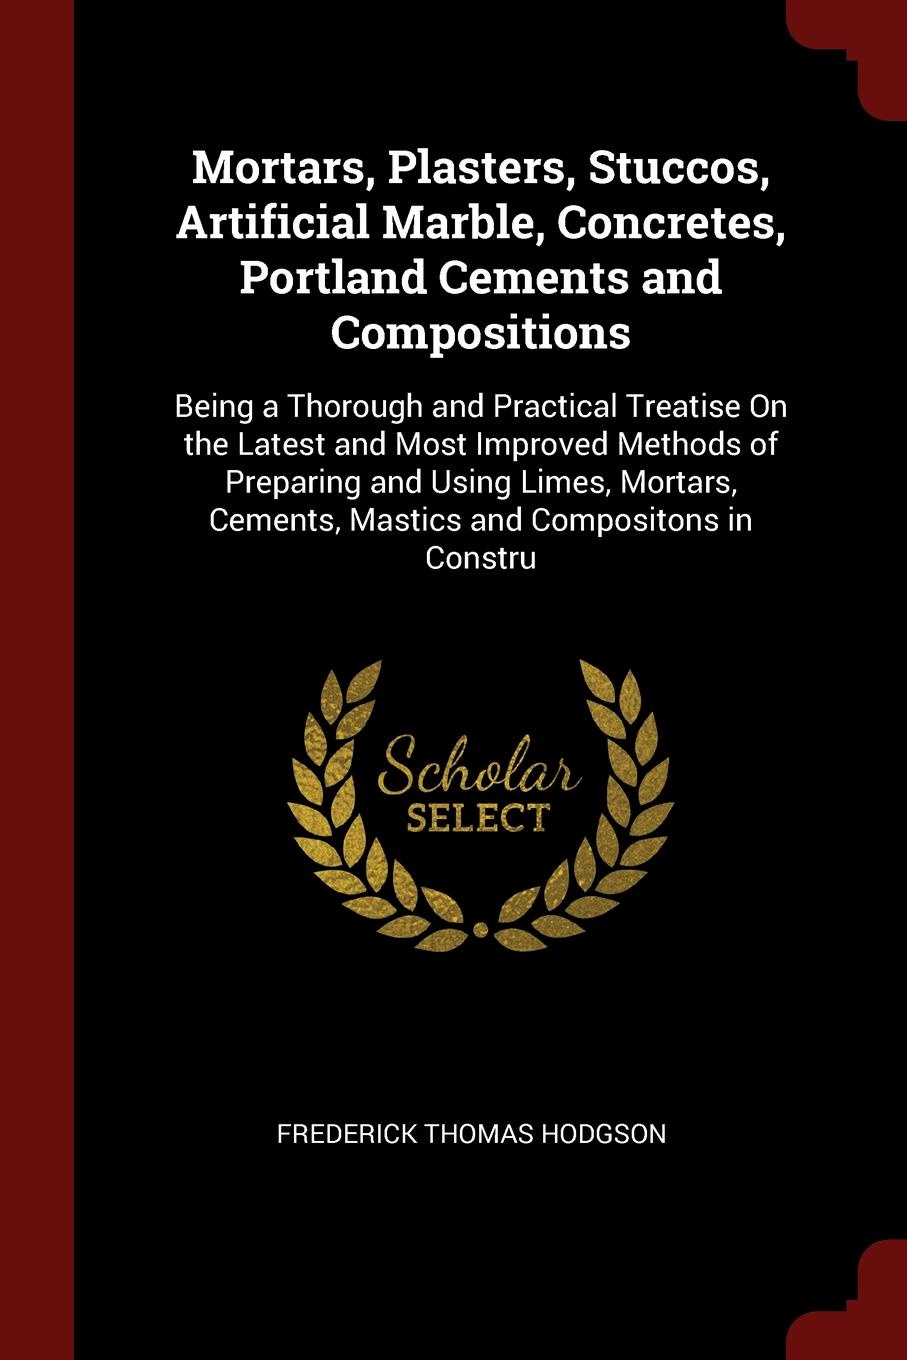 Mortars, Plasters, Stuccos, Artificial Marble, Concretes, Portland Cements and Compositions. Being a Thorough and Practical Treatise On the Latest and Most Improved Methods of Preparing and Using Limes, Mortars, Cements, Mastics and Compositons in...